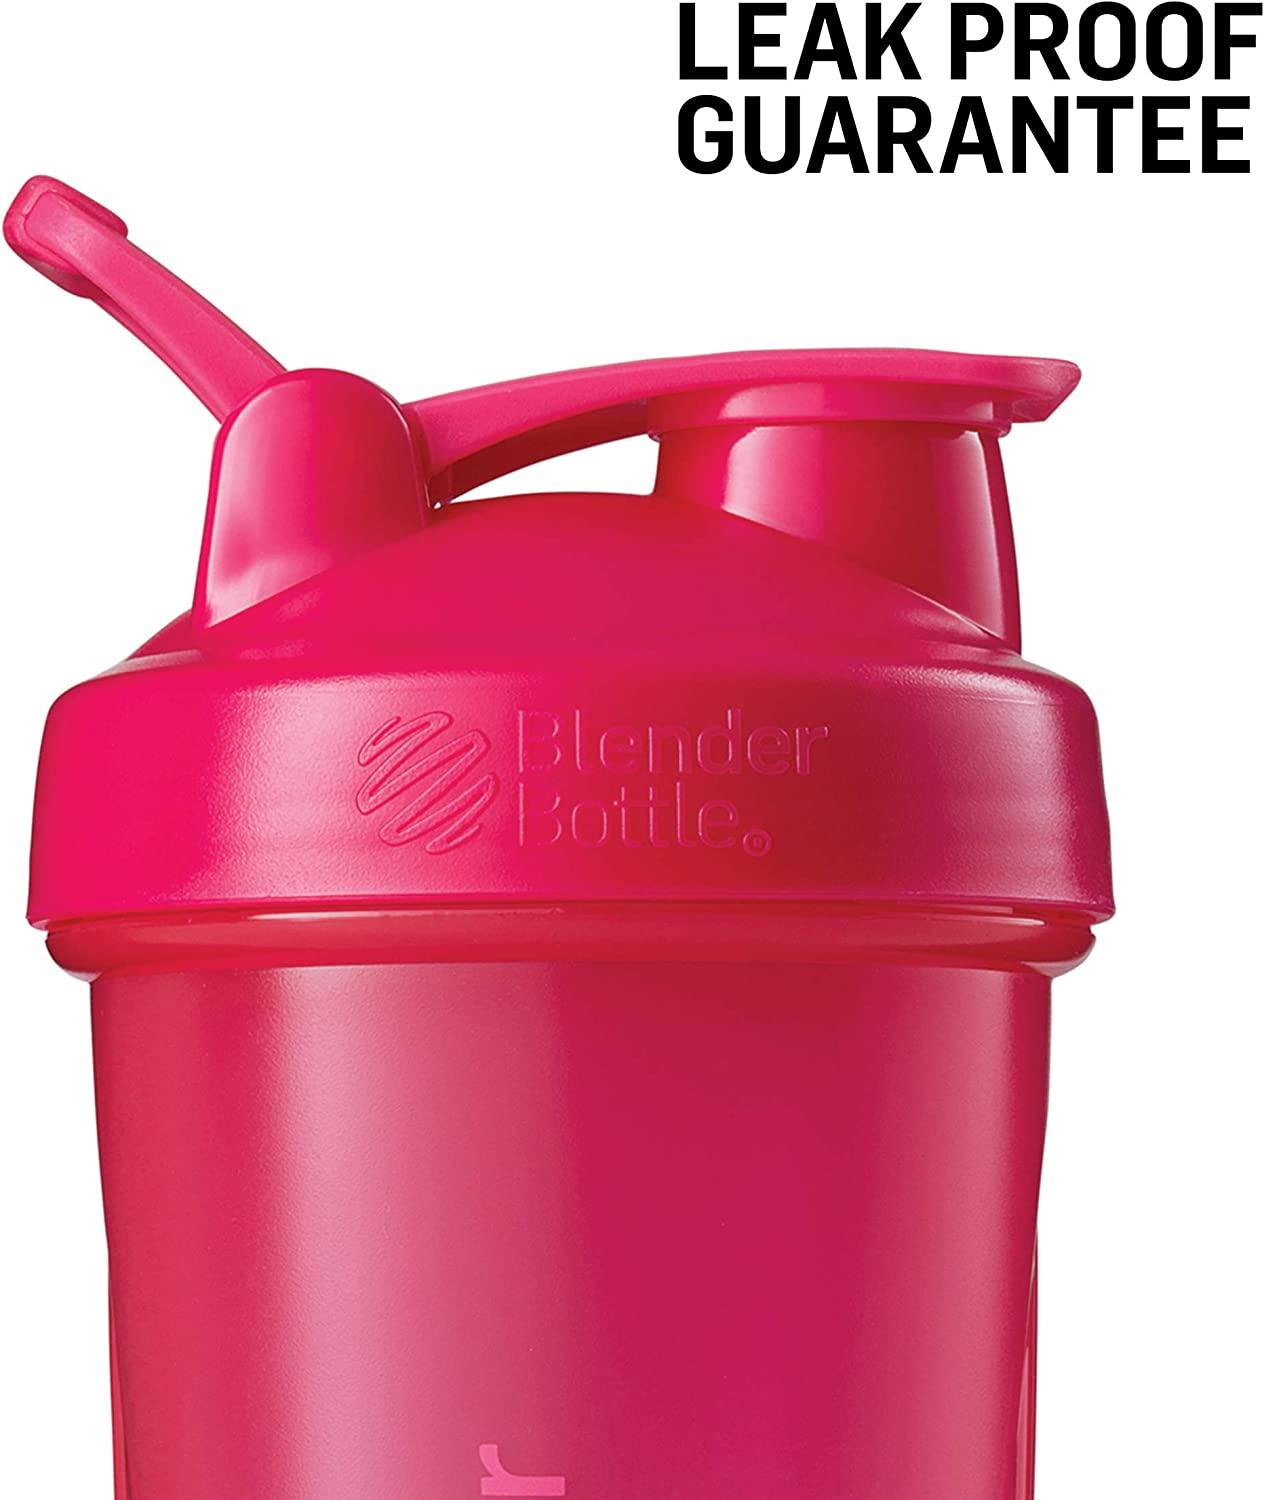 Blender Bottle Classic 45 oz. Shaker Mixer Cup with Loop Top - Pebble Gray  